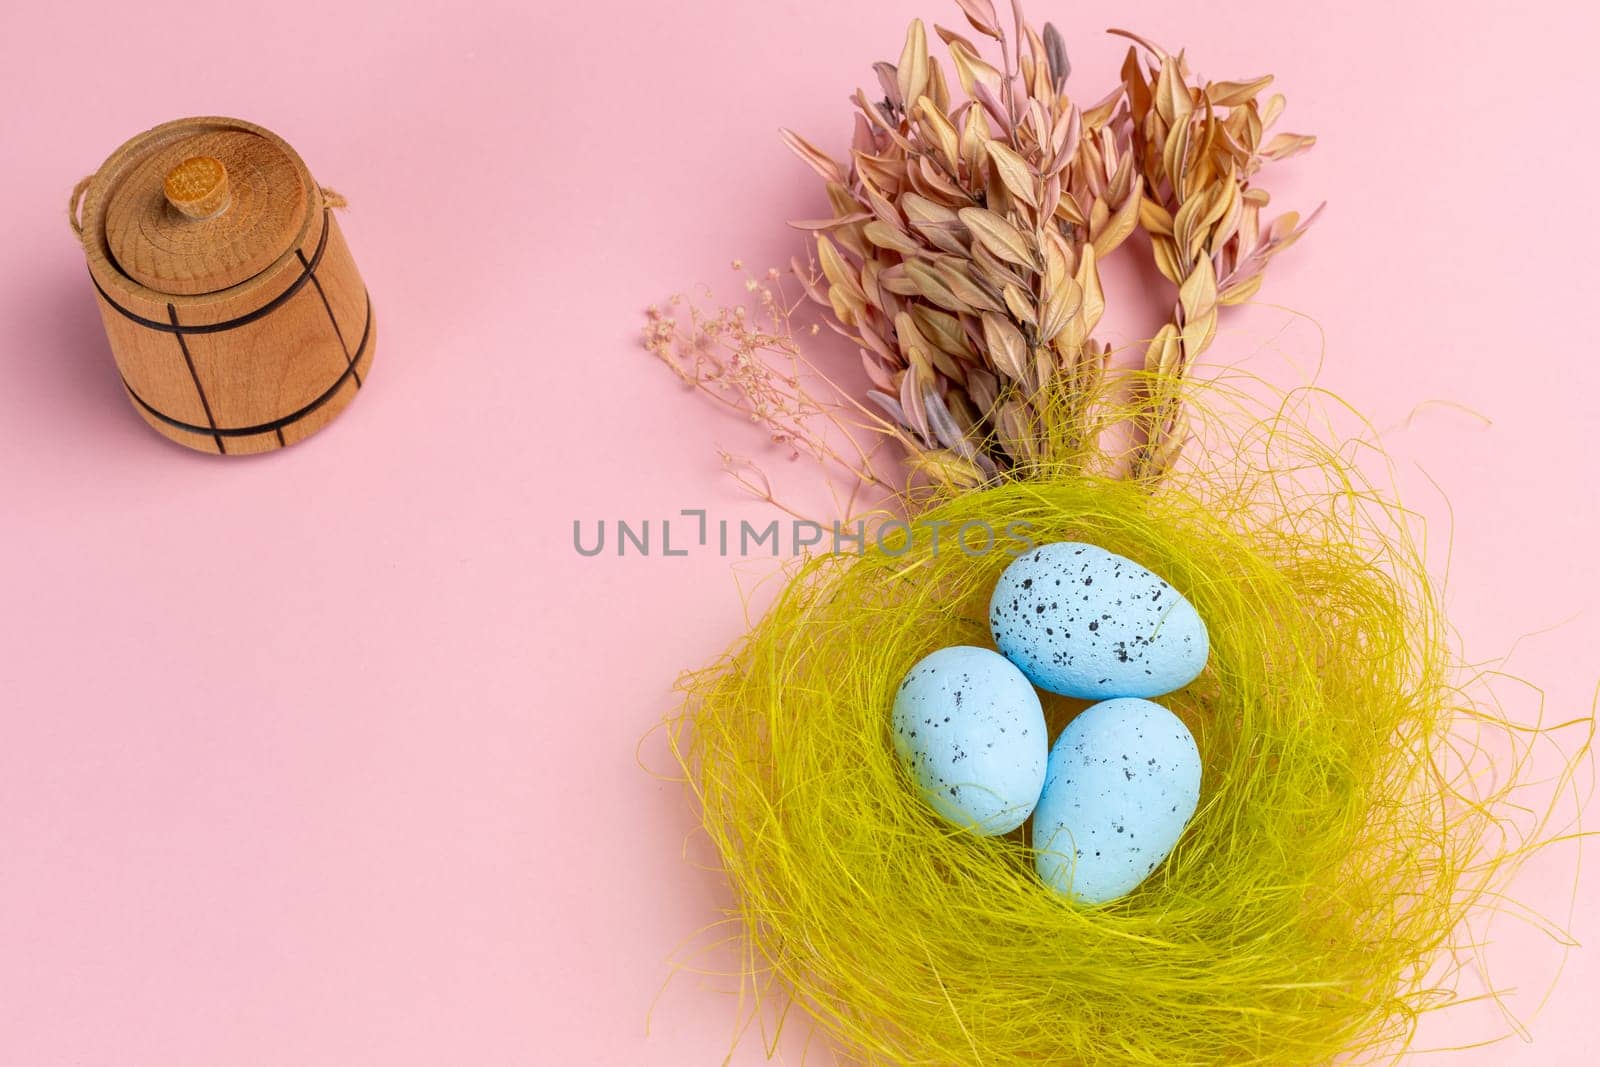 Nest with colored Easter eggs on the pink background with decor plants and wooden utensil. Top view.